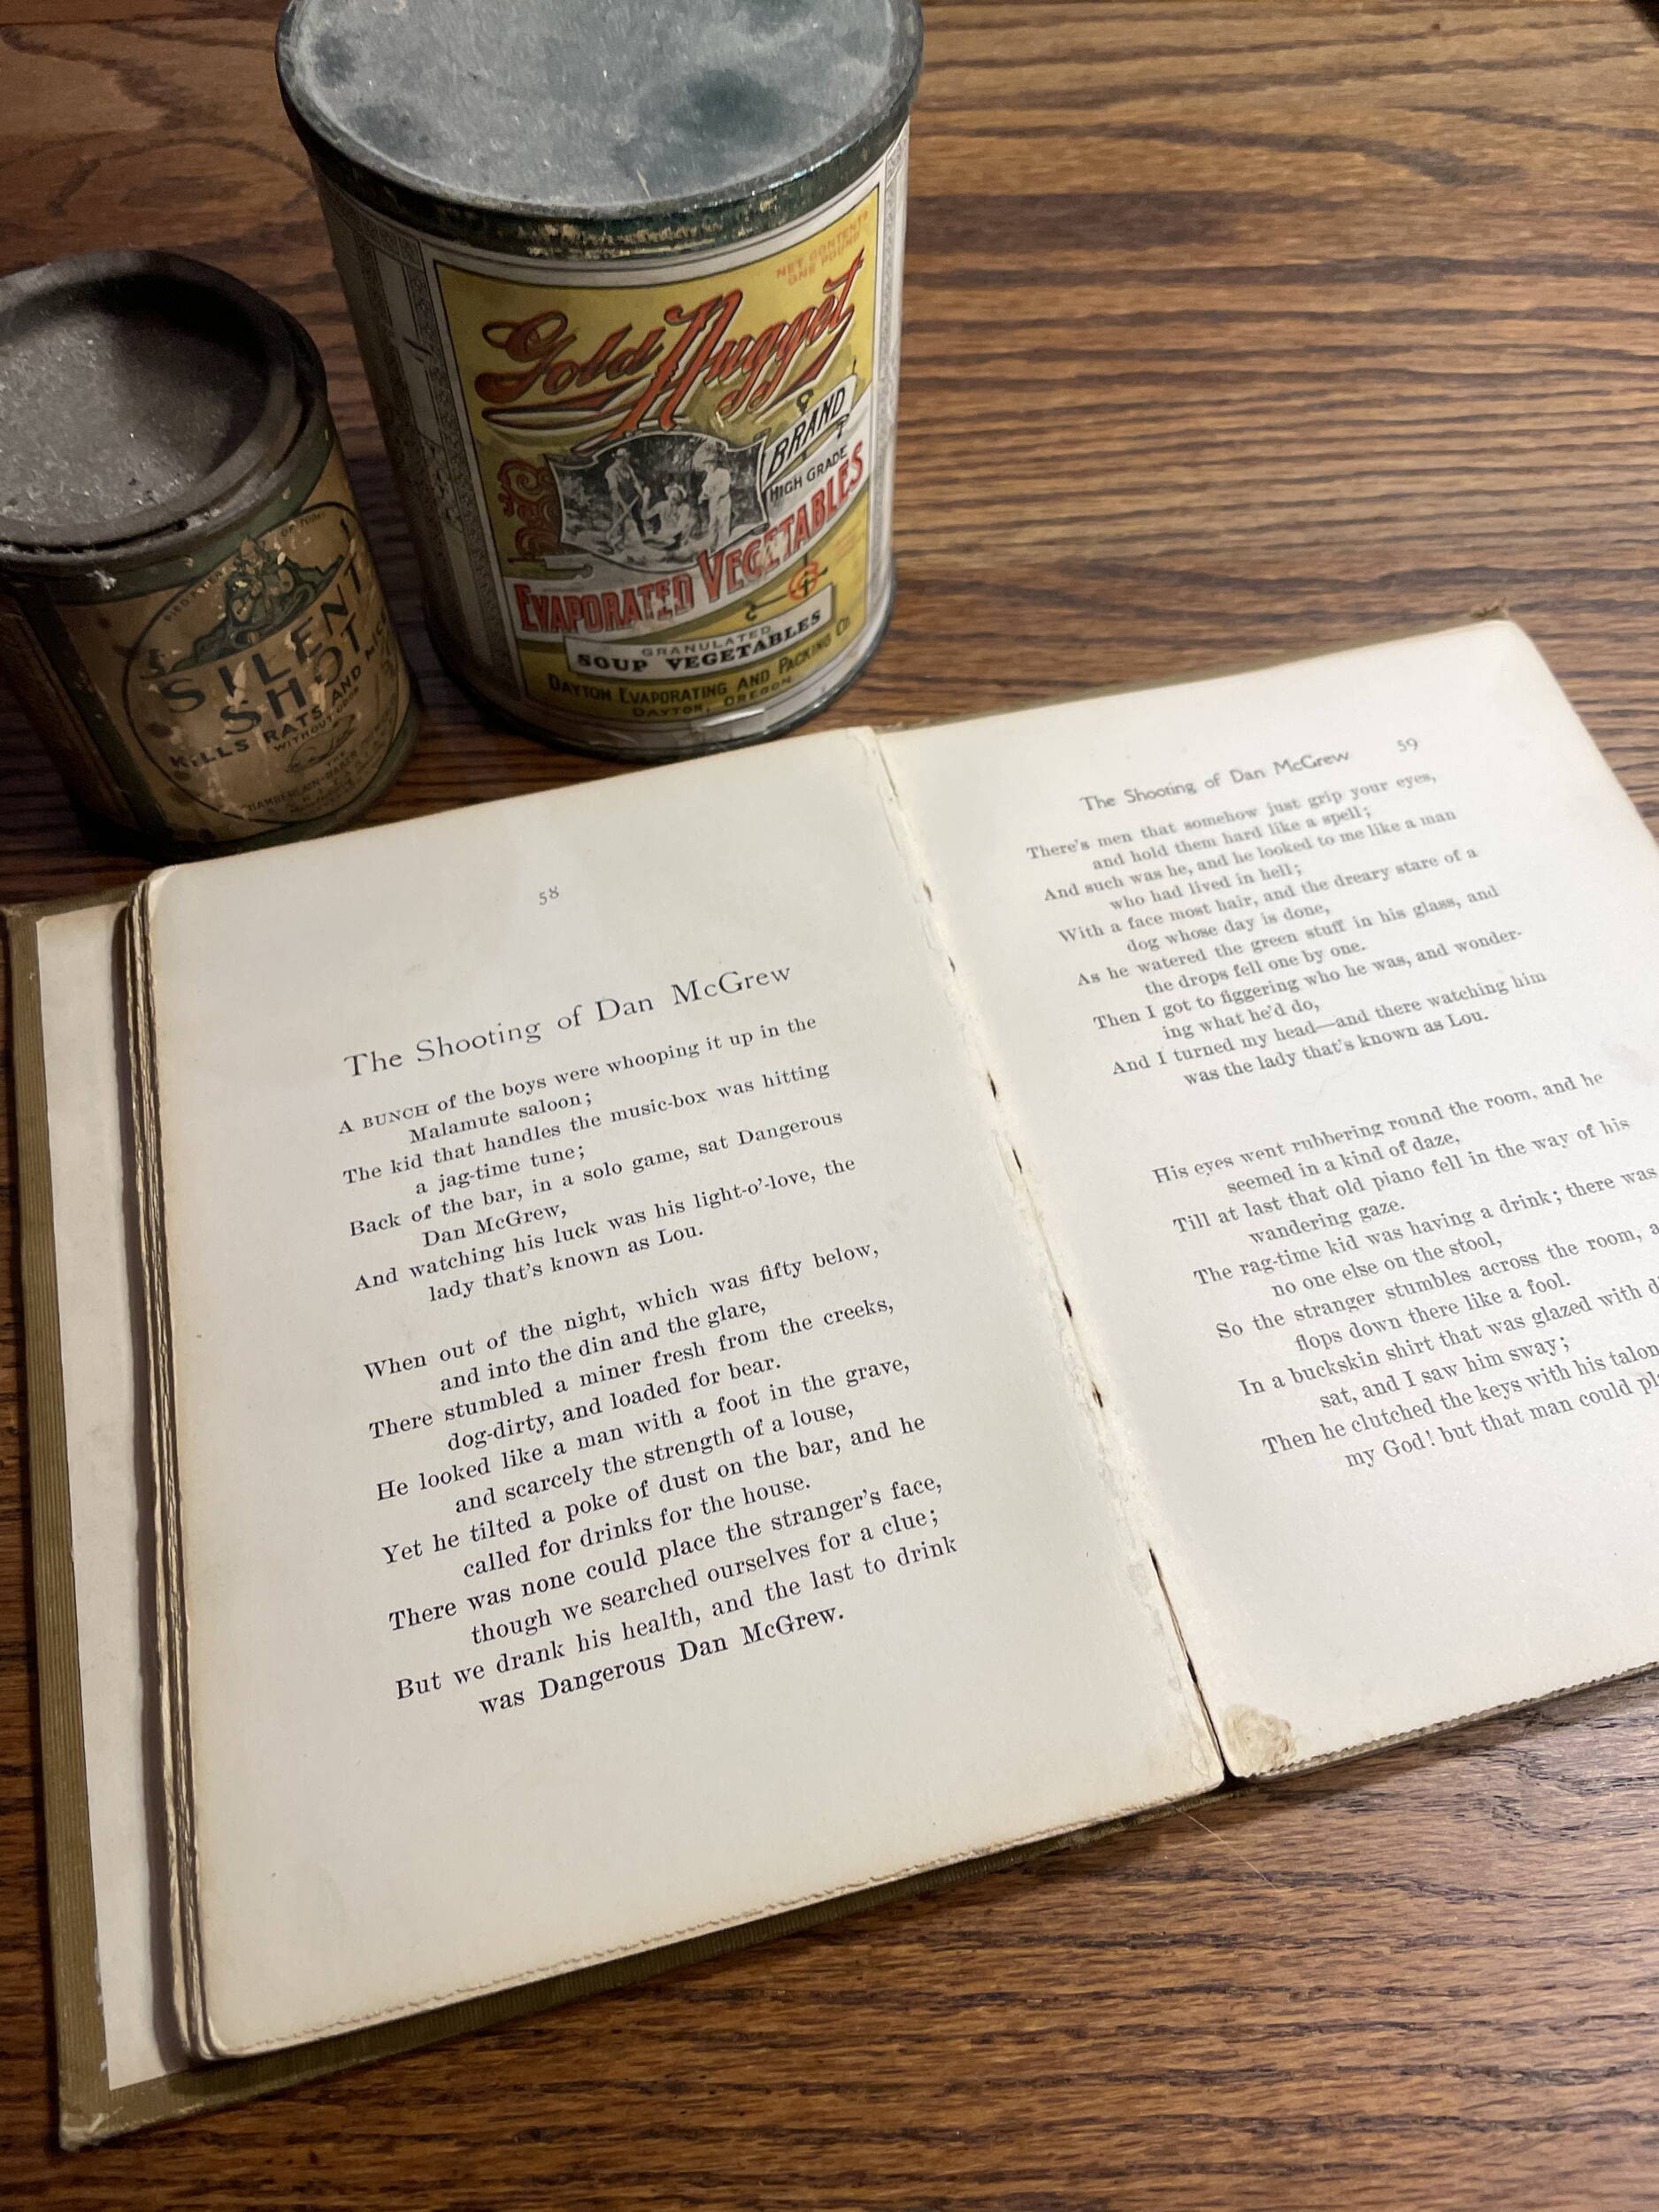 One of Robert Service’s most famous poems, “The Shooting of Dan McGrew,” in his book “Songs of A Sourdough” originally published in 1908. (Photo by Laurie Craig)